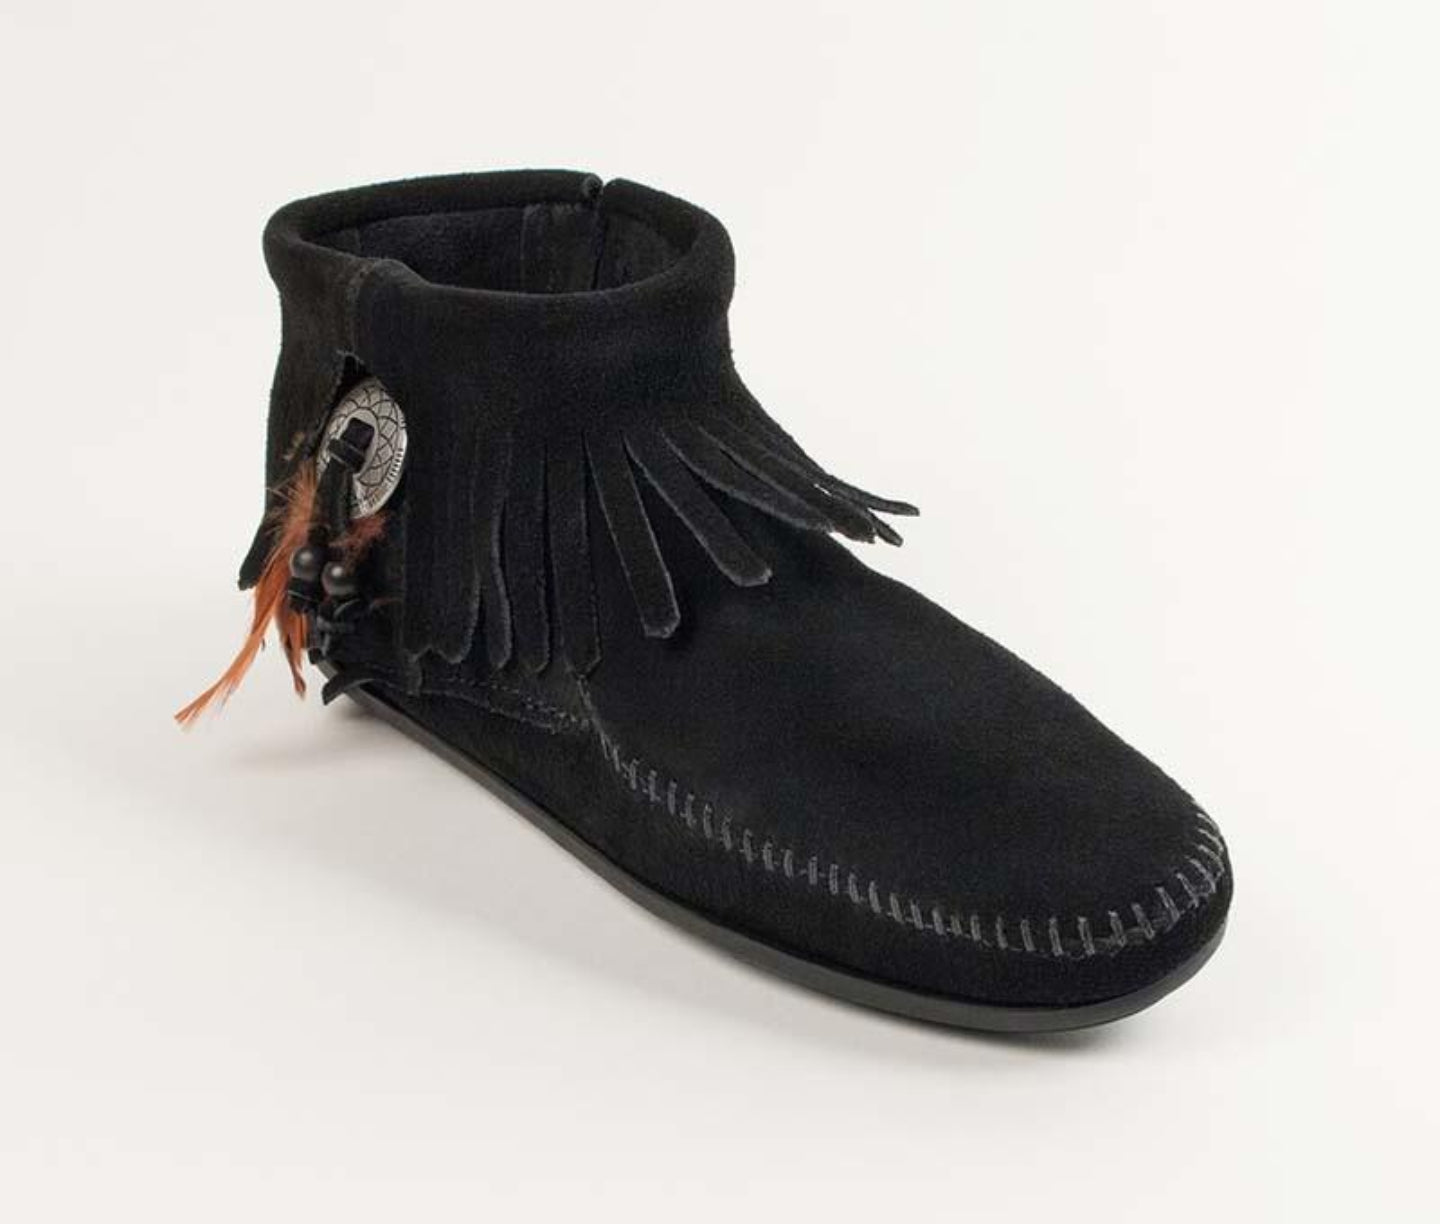 Concho Feather Boot in Black from 3/4 Angle View